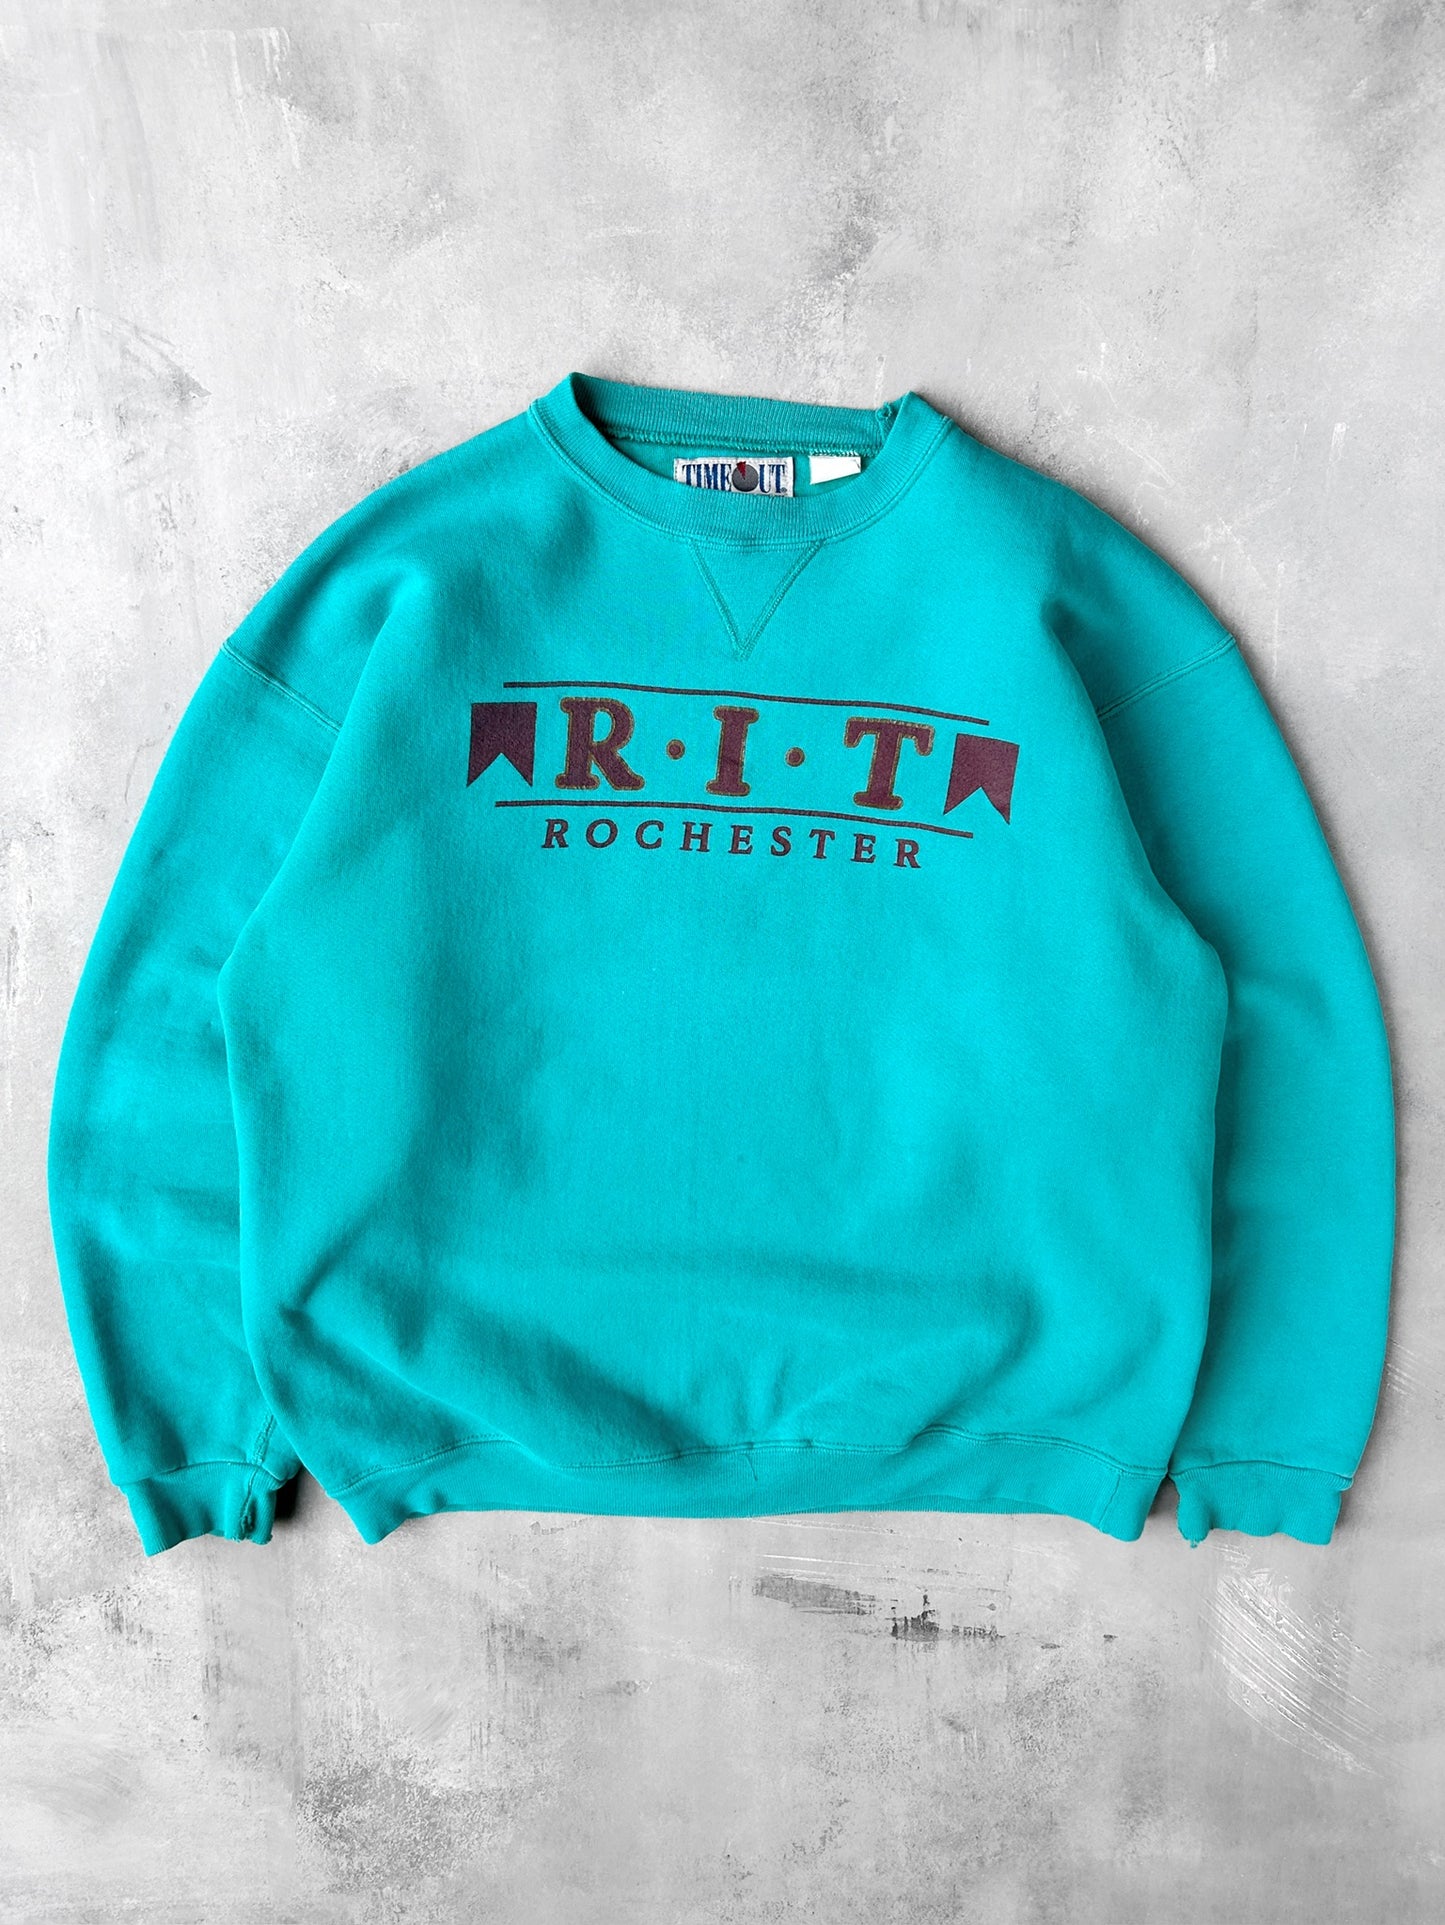 Rochester Institute of Technology Sweatshirt 90's - Large